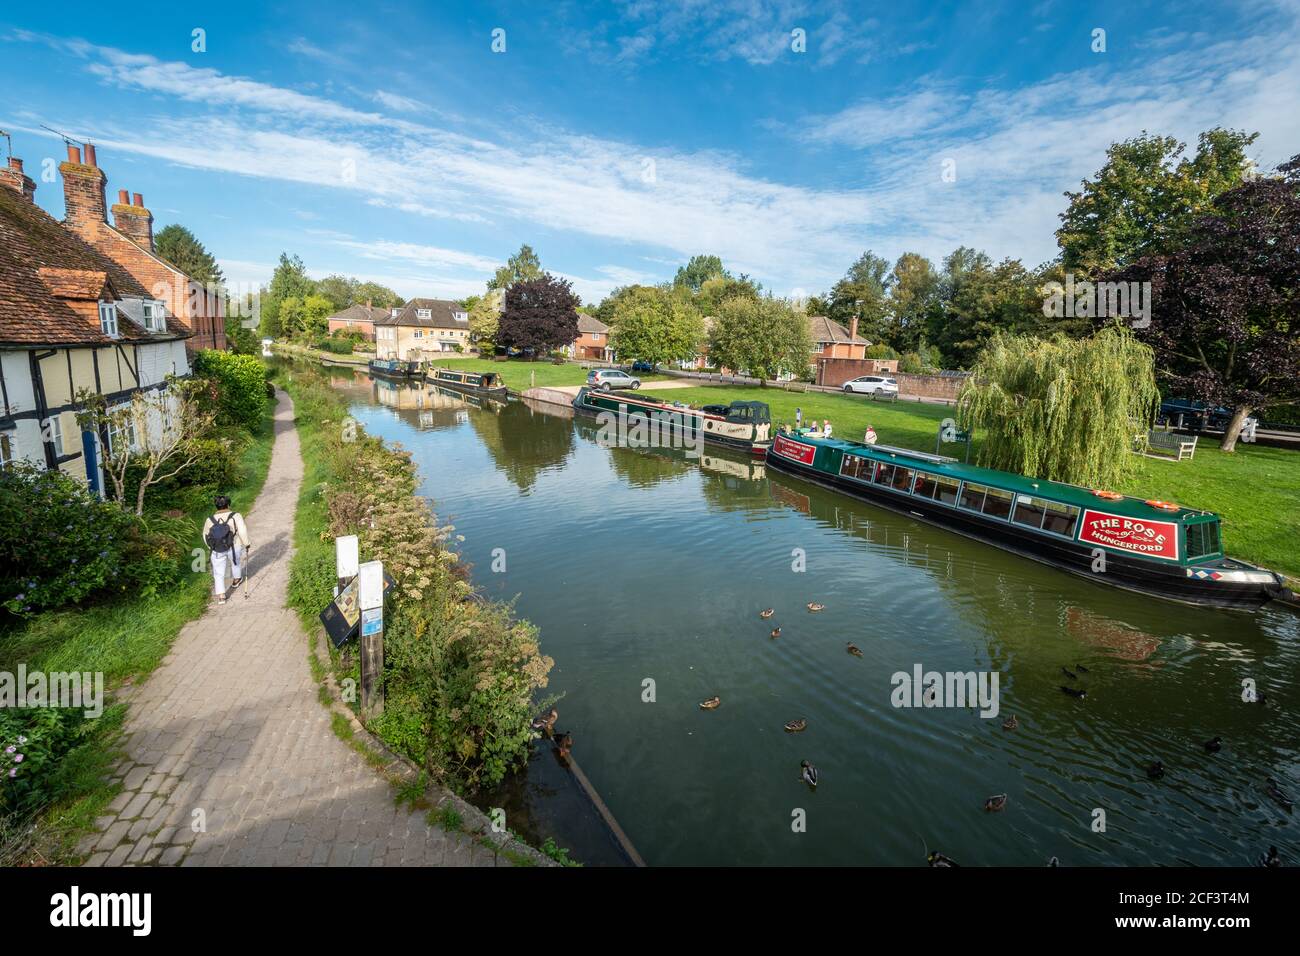 Hungerford, Berkshire, UK. View of the Kennet and Avon Canal with narrowboats Stock Photo